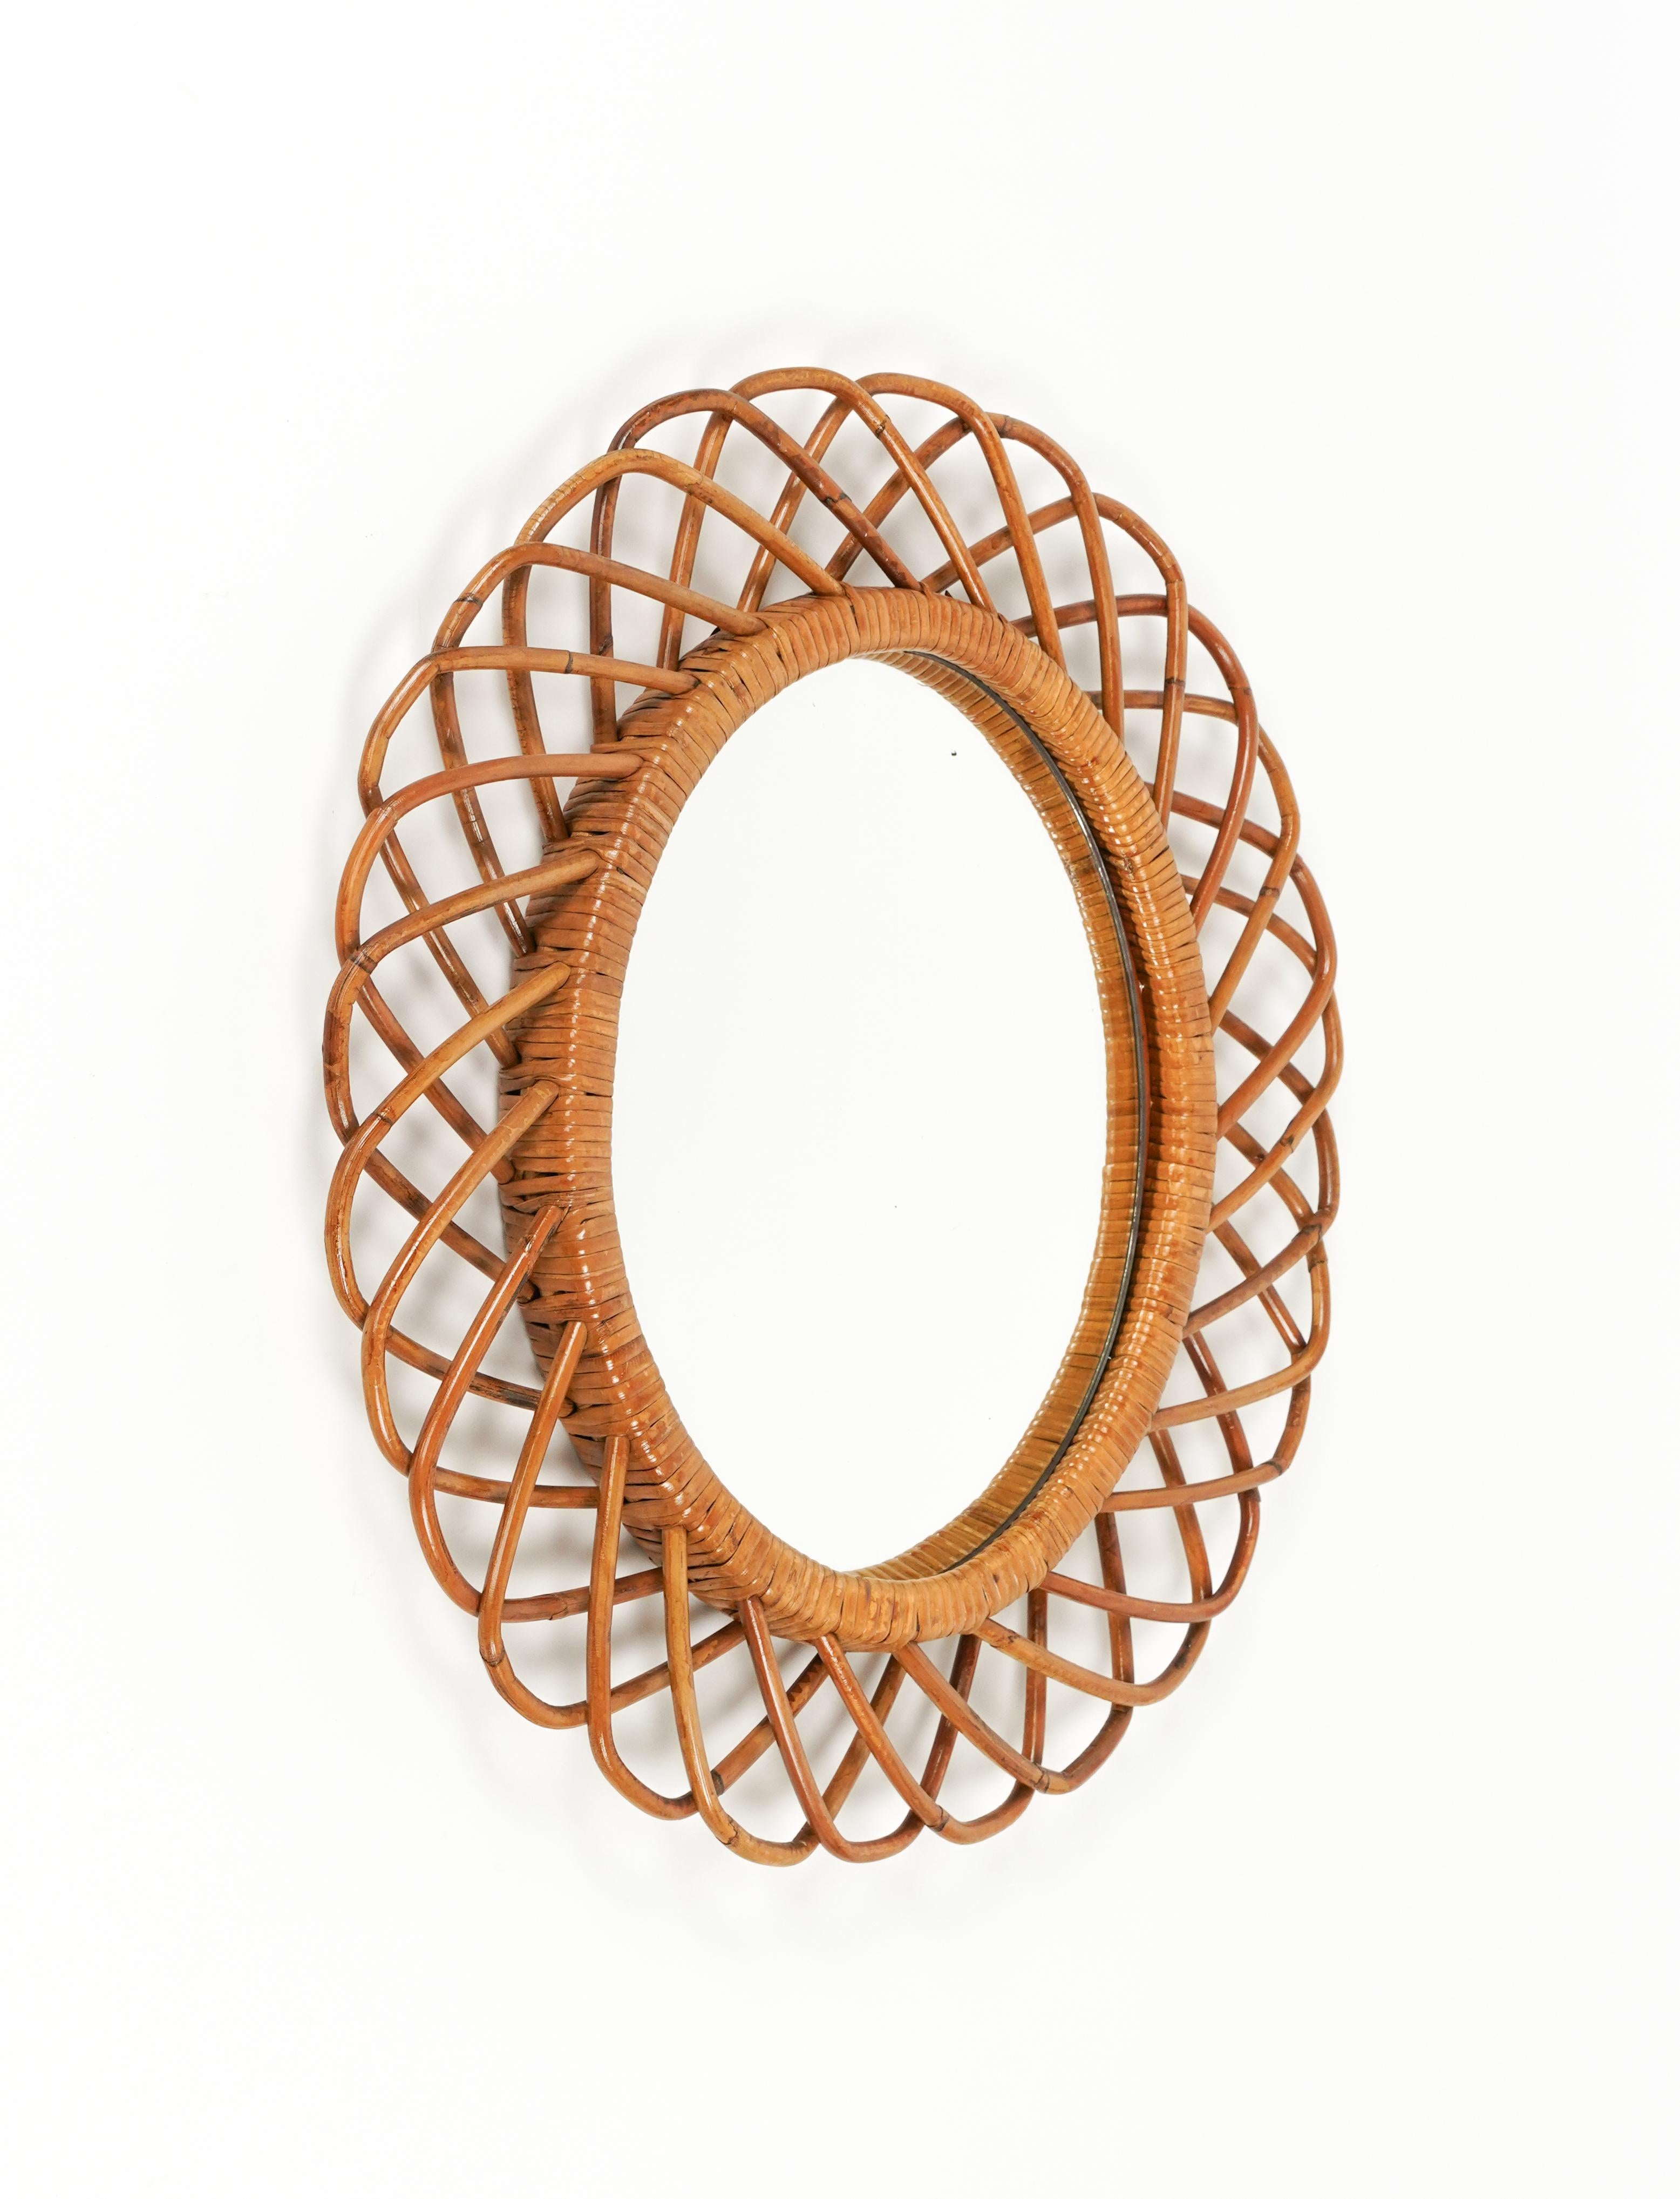 Midcentury beautiful oval wall mirror in bamboo and rattan.  

Made in Italy in the 1960s.